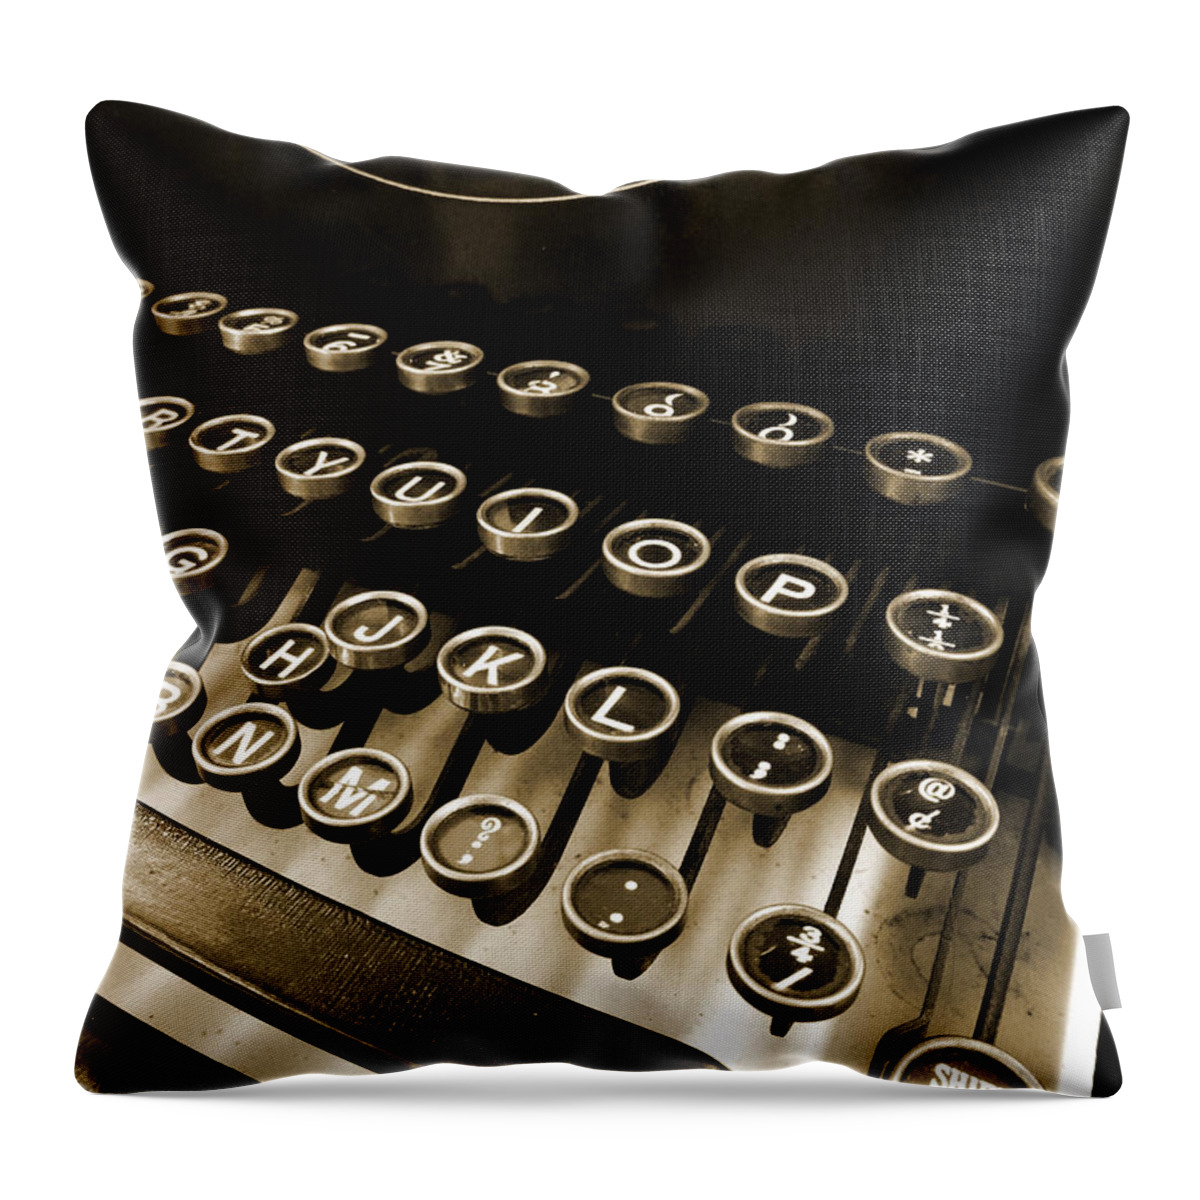 Royal Typewriter Throw Pillow featuring the photograph Royal H Sepia by David T Wilkinson